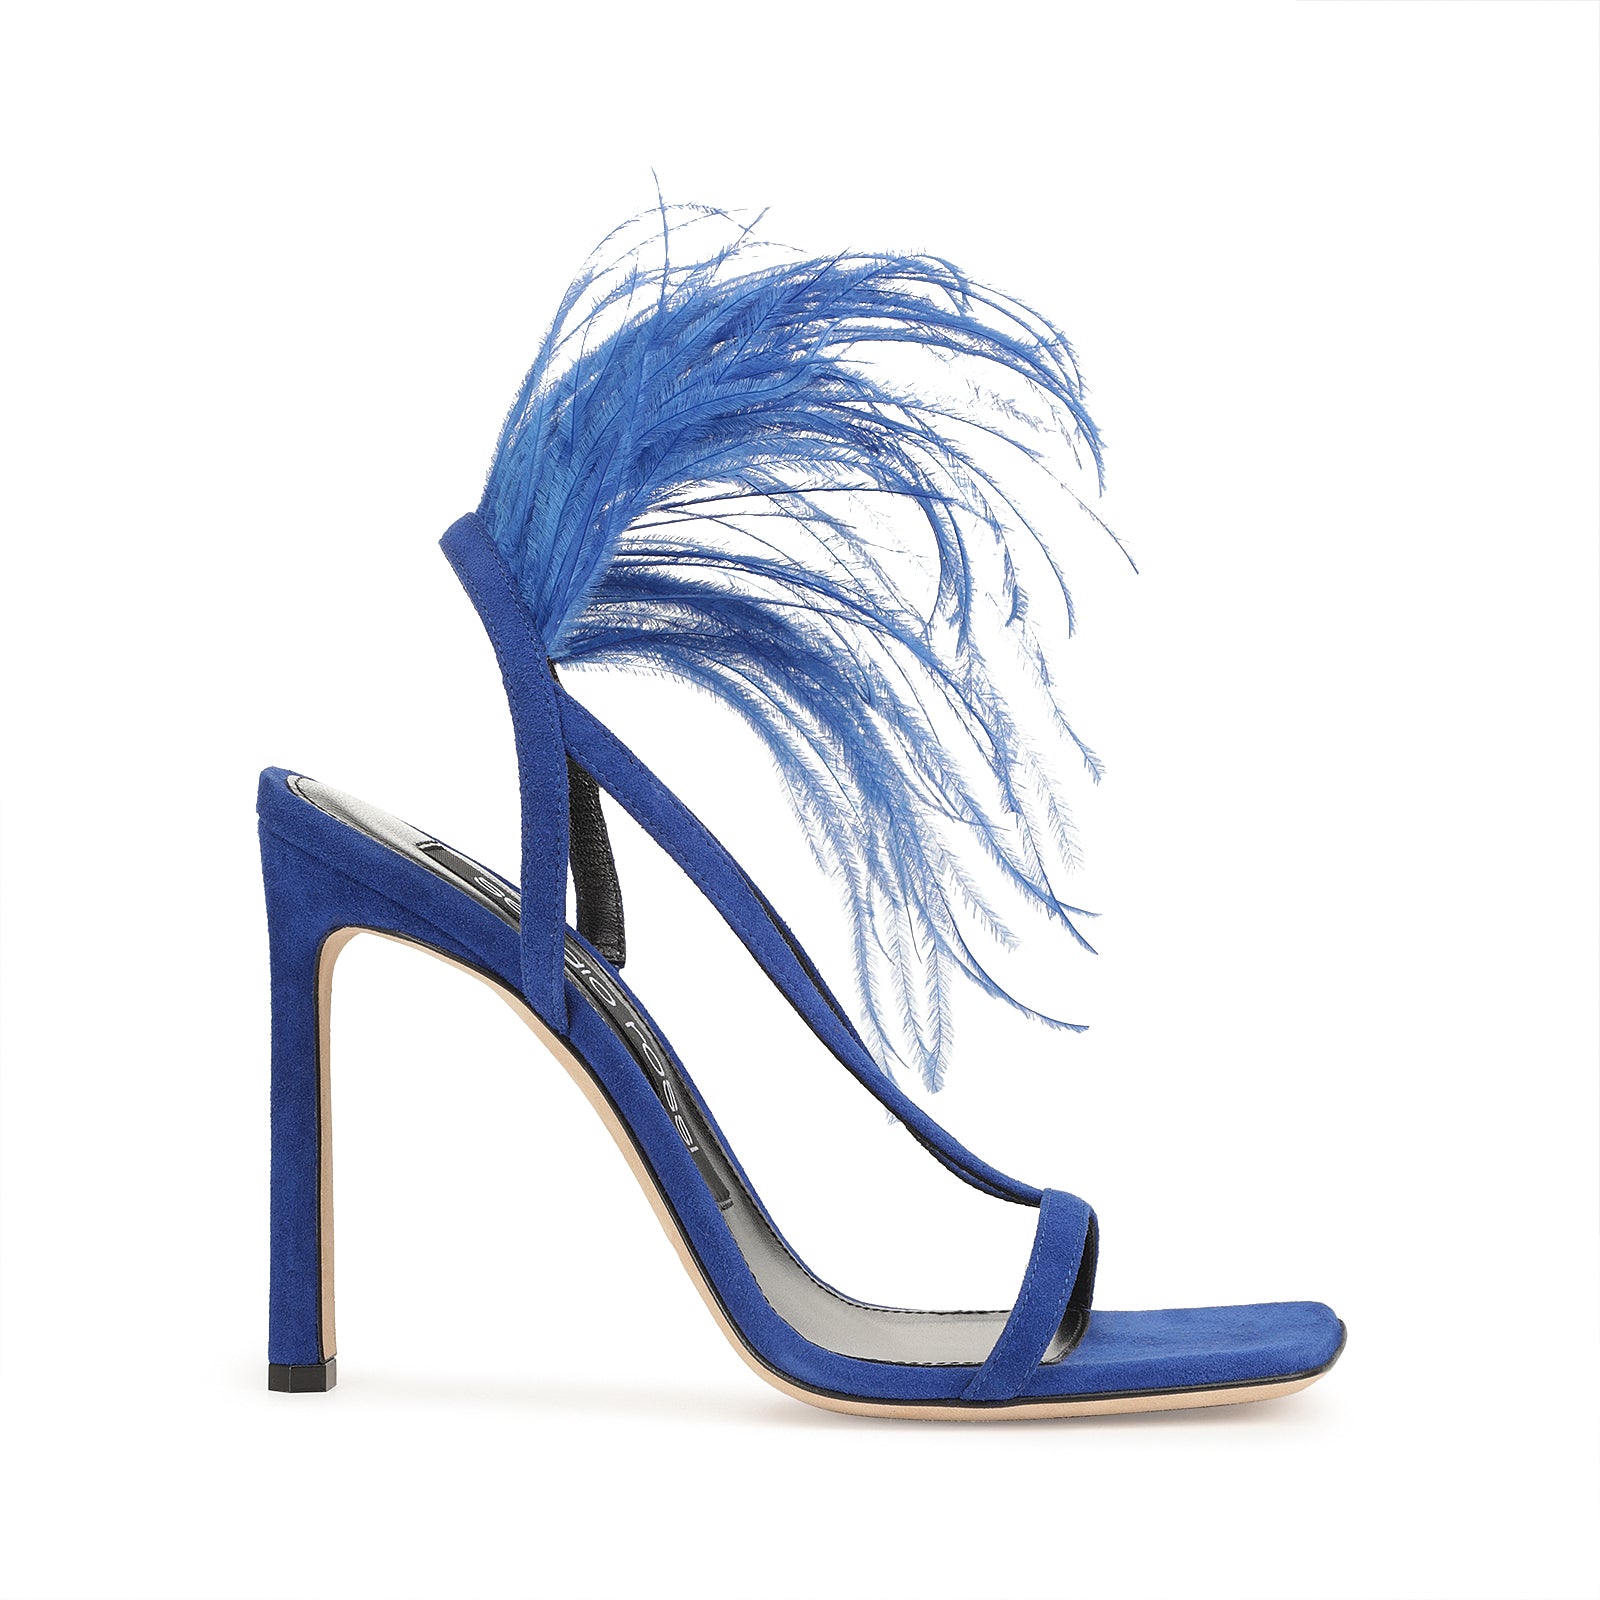 Zara Leather High Heeled Sandals with Feathers | Fashion shoes, Shoe  inspiration, Me too shoes